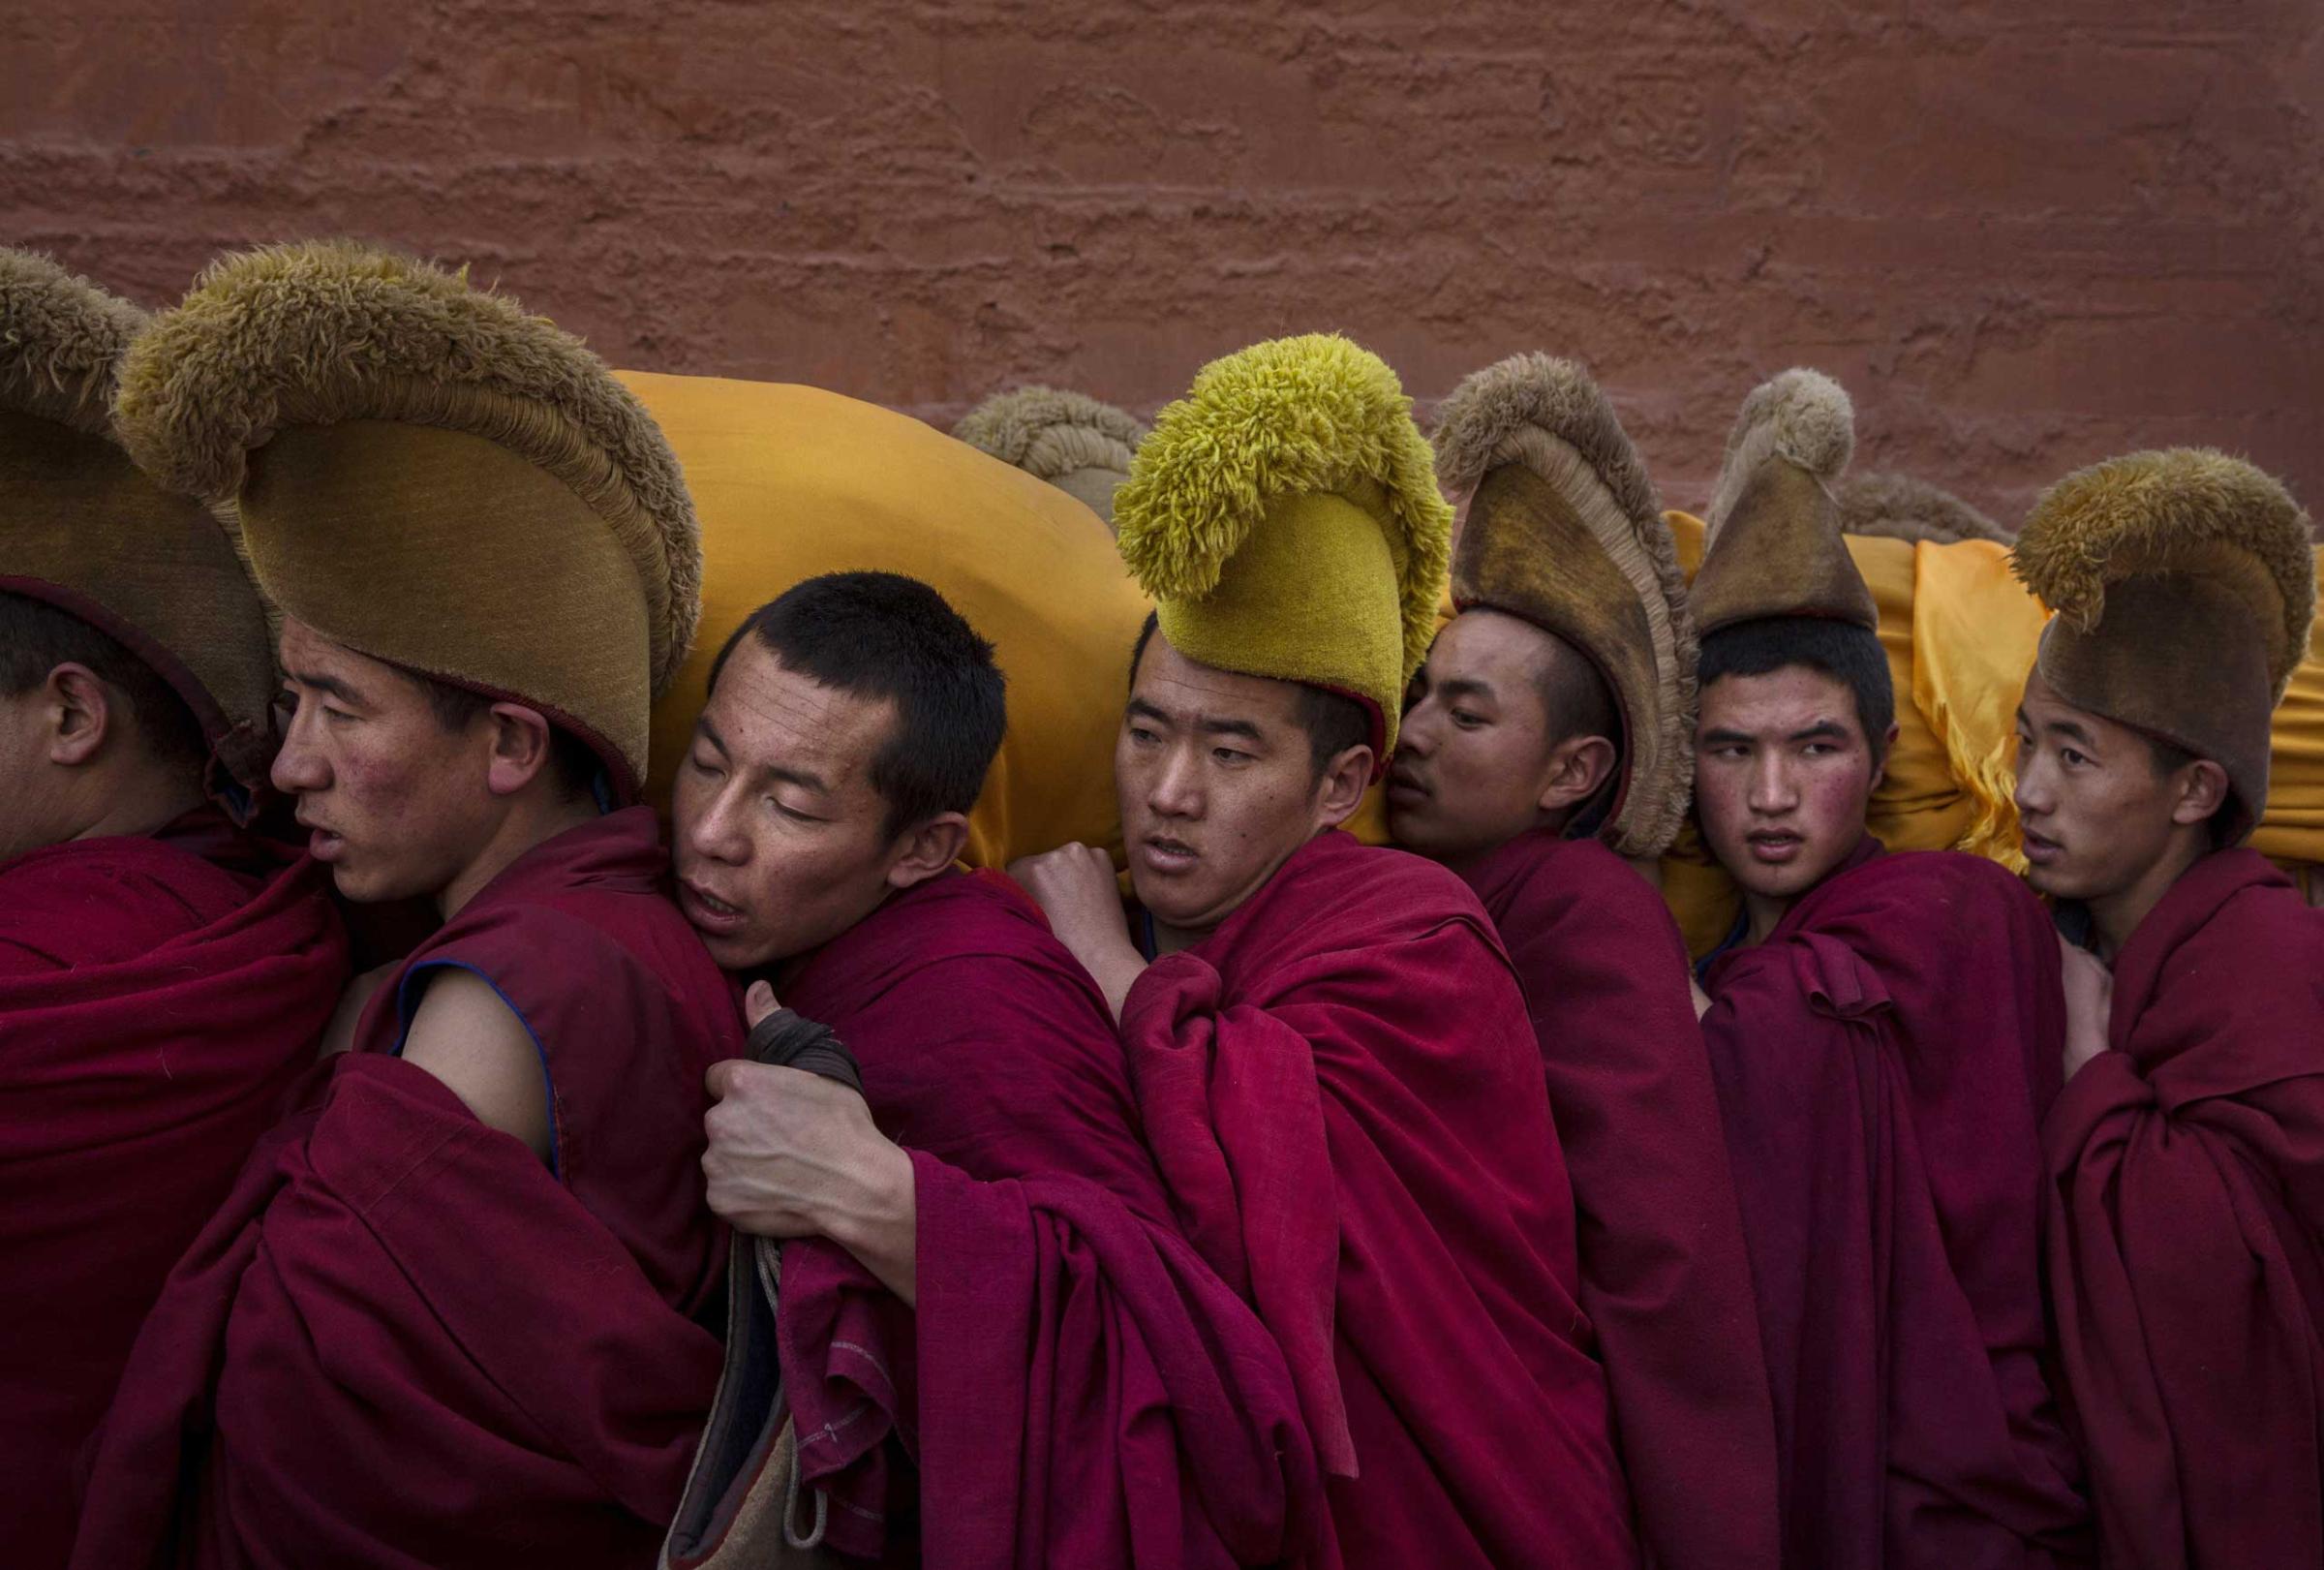 Tibetan Buddhist Monks of the Gelug, or Yellow Hat order, carry a large thangka of Buddha after showing it to worshippers during Monlam or the Great Prayer rituals on March 3, 2015 at the Labrang Monastery.